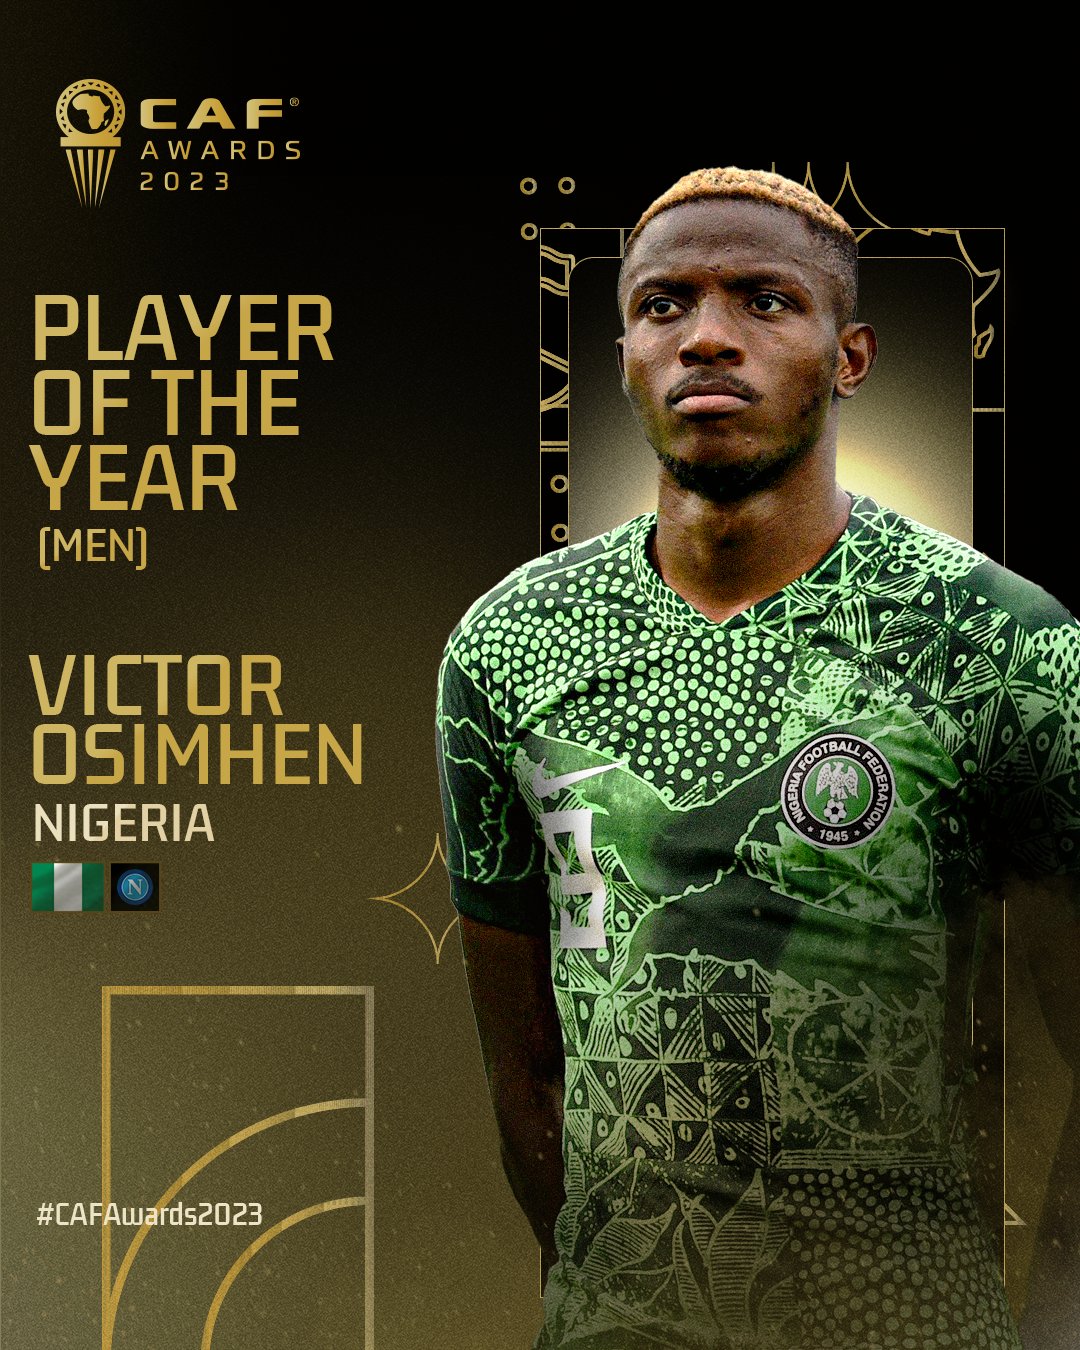 "It's a dream come true" - Osimhen wins African Best Player of the Year Award